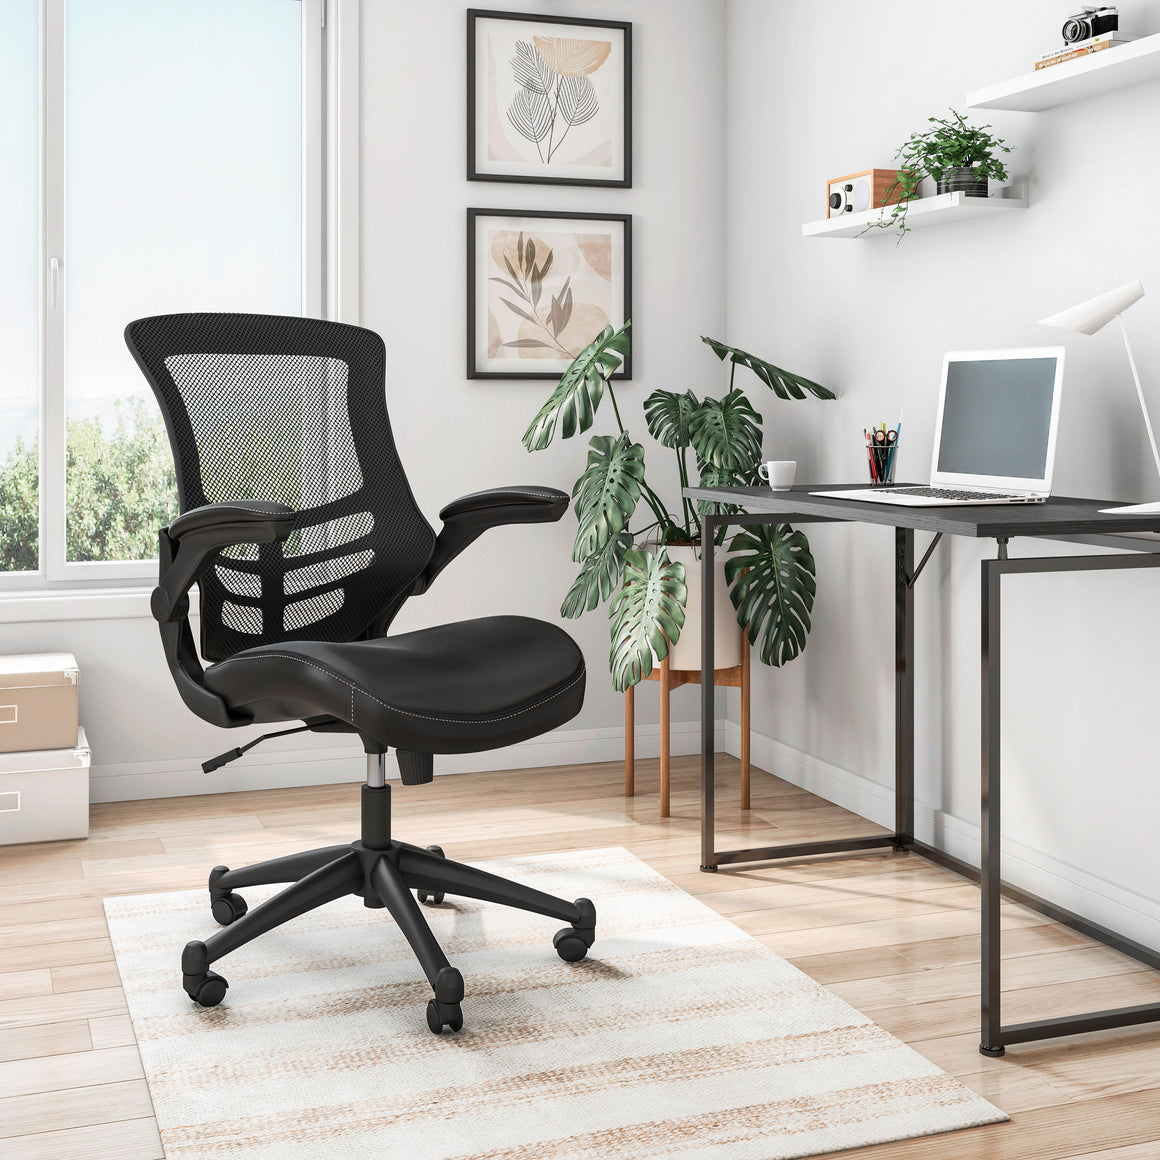 Stylish Mid-Back Mesh Office Chair With Adjustable Arms